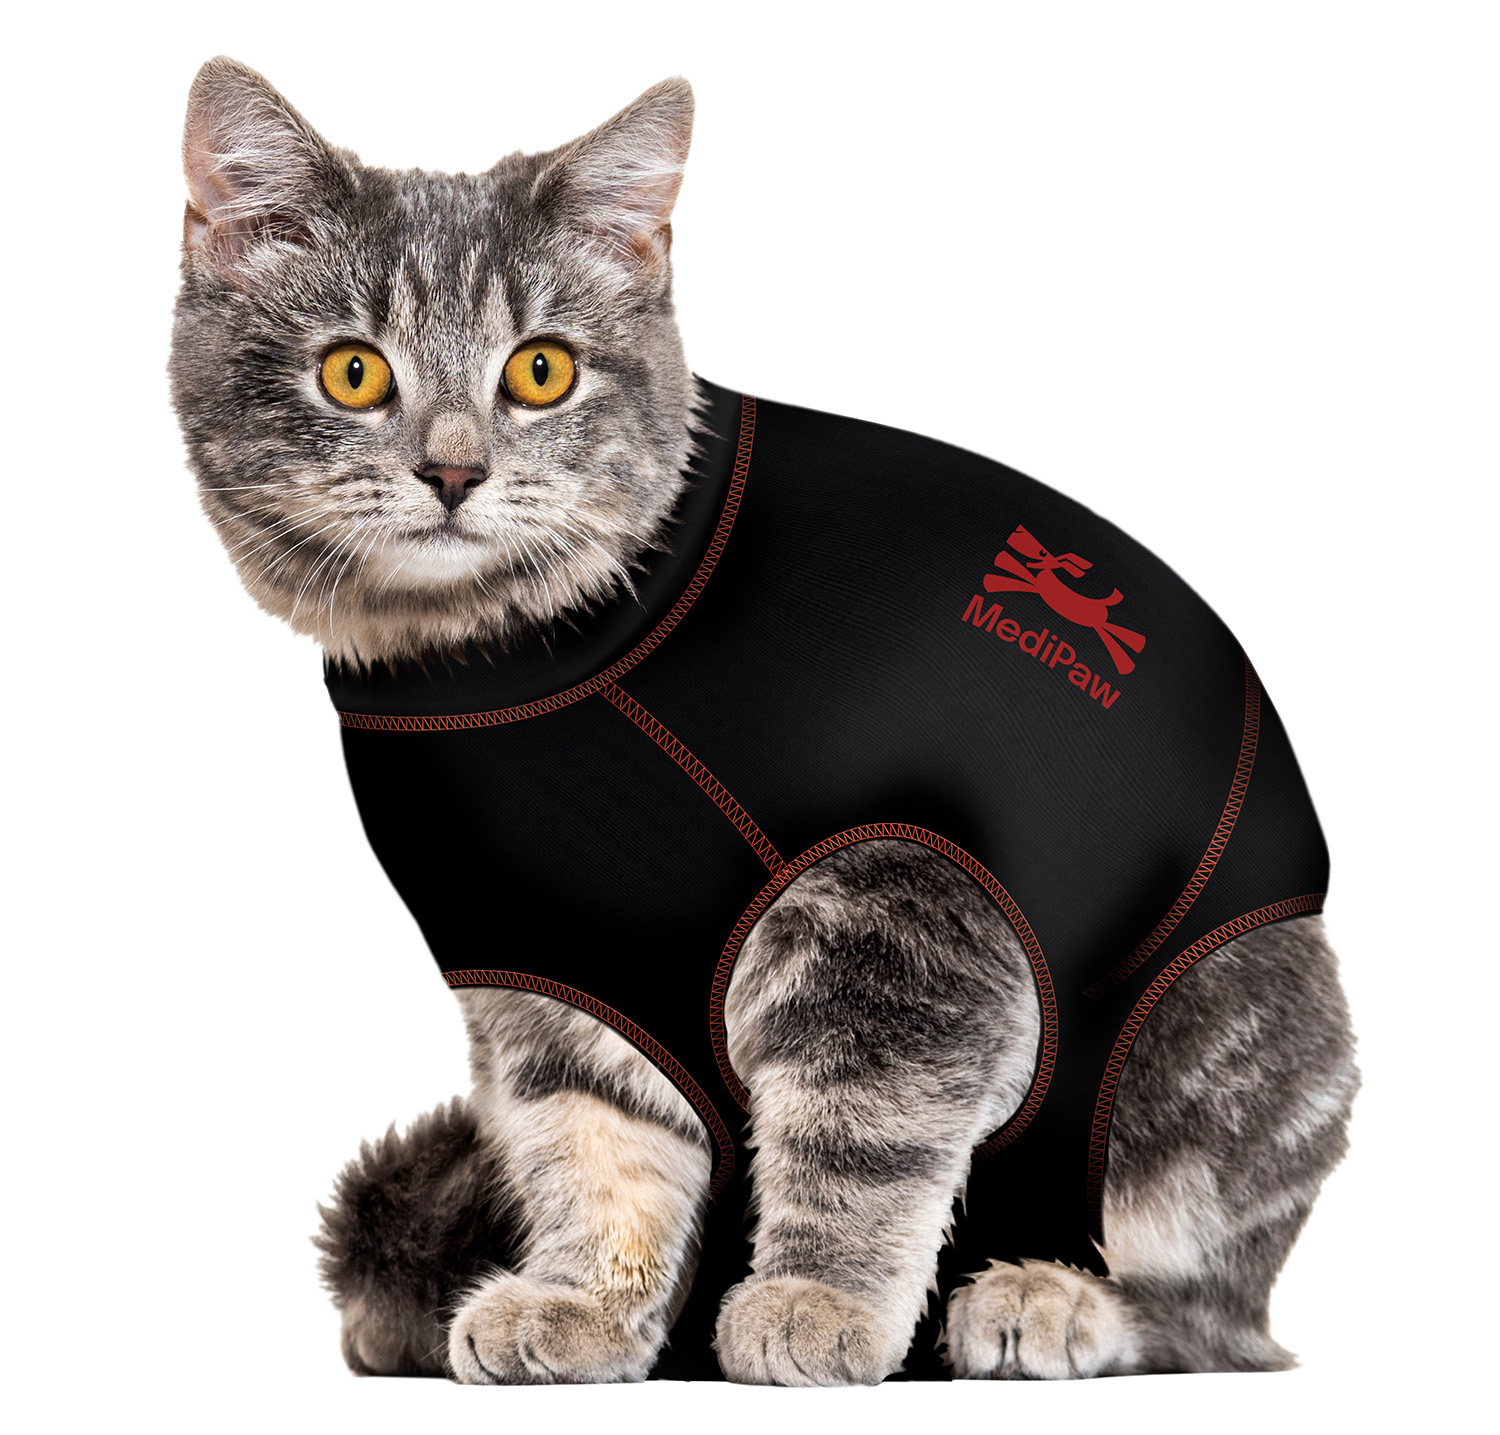 Grey Tabby wearing a Medipaw Cat Suit